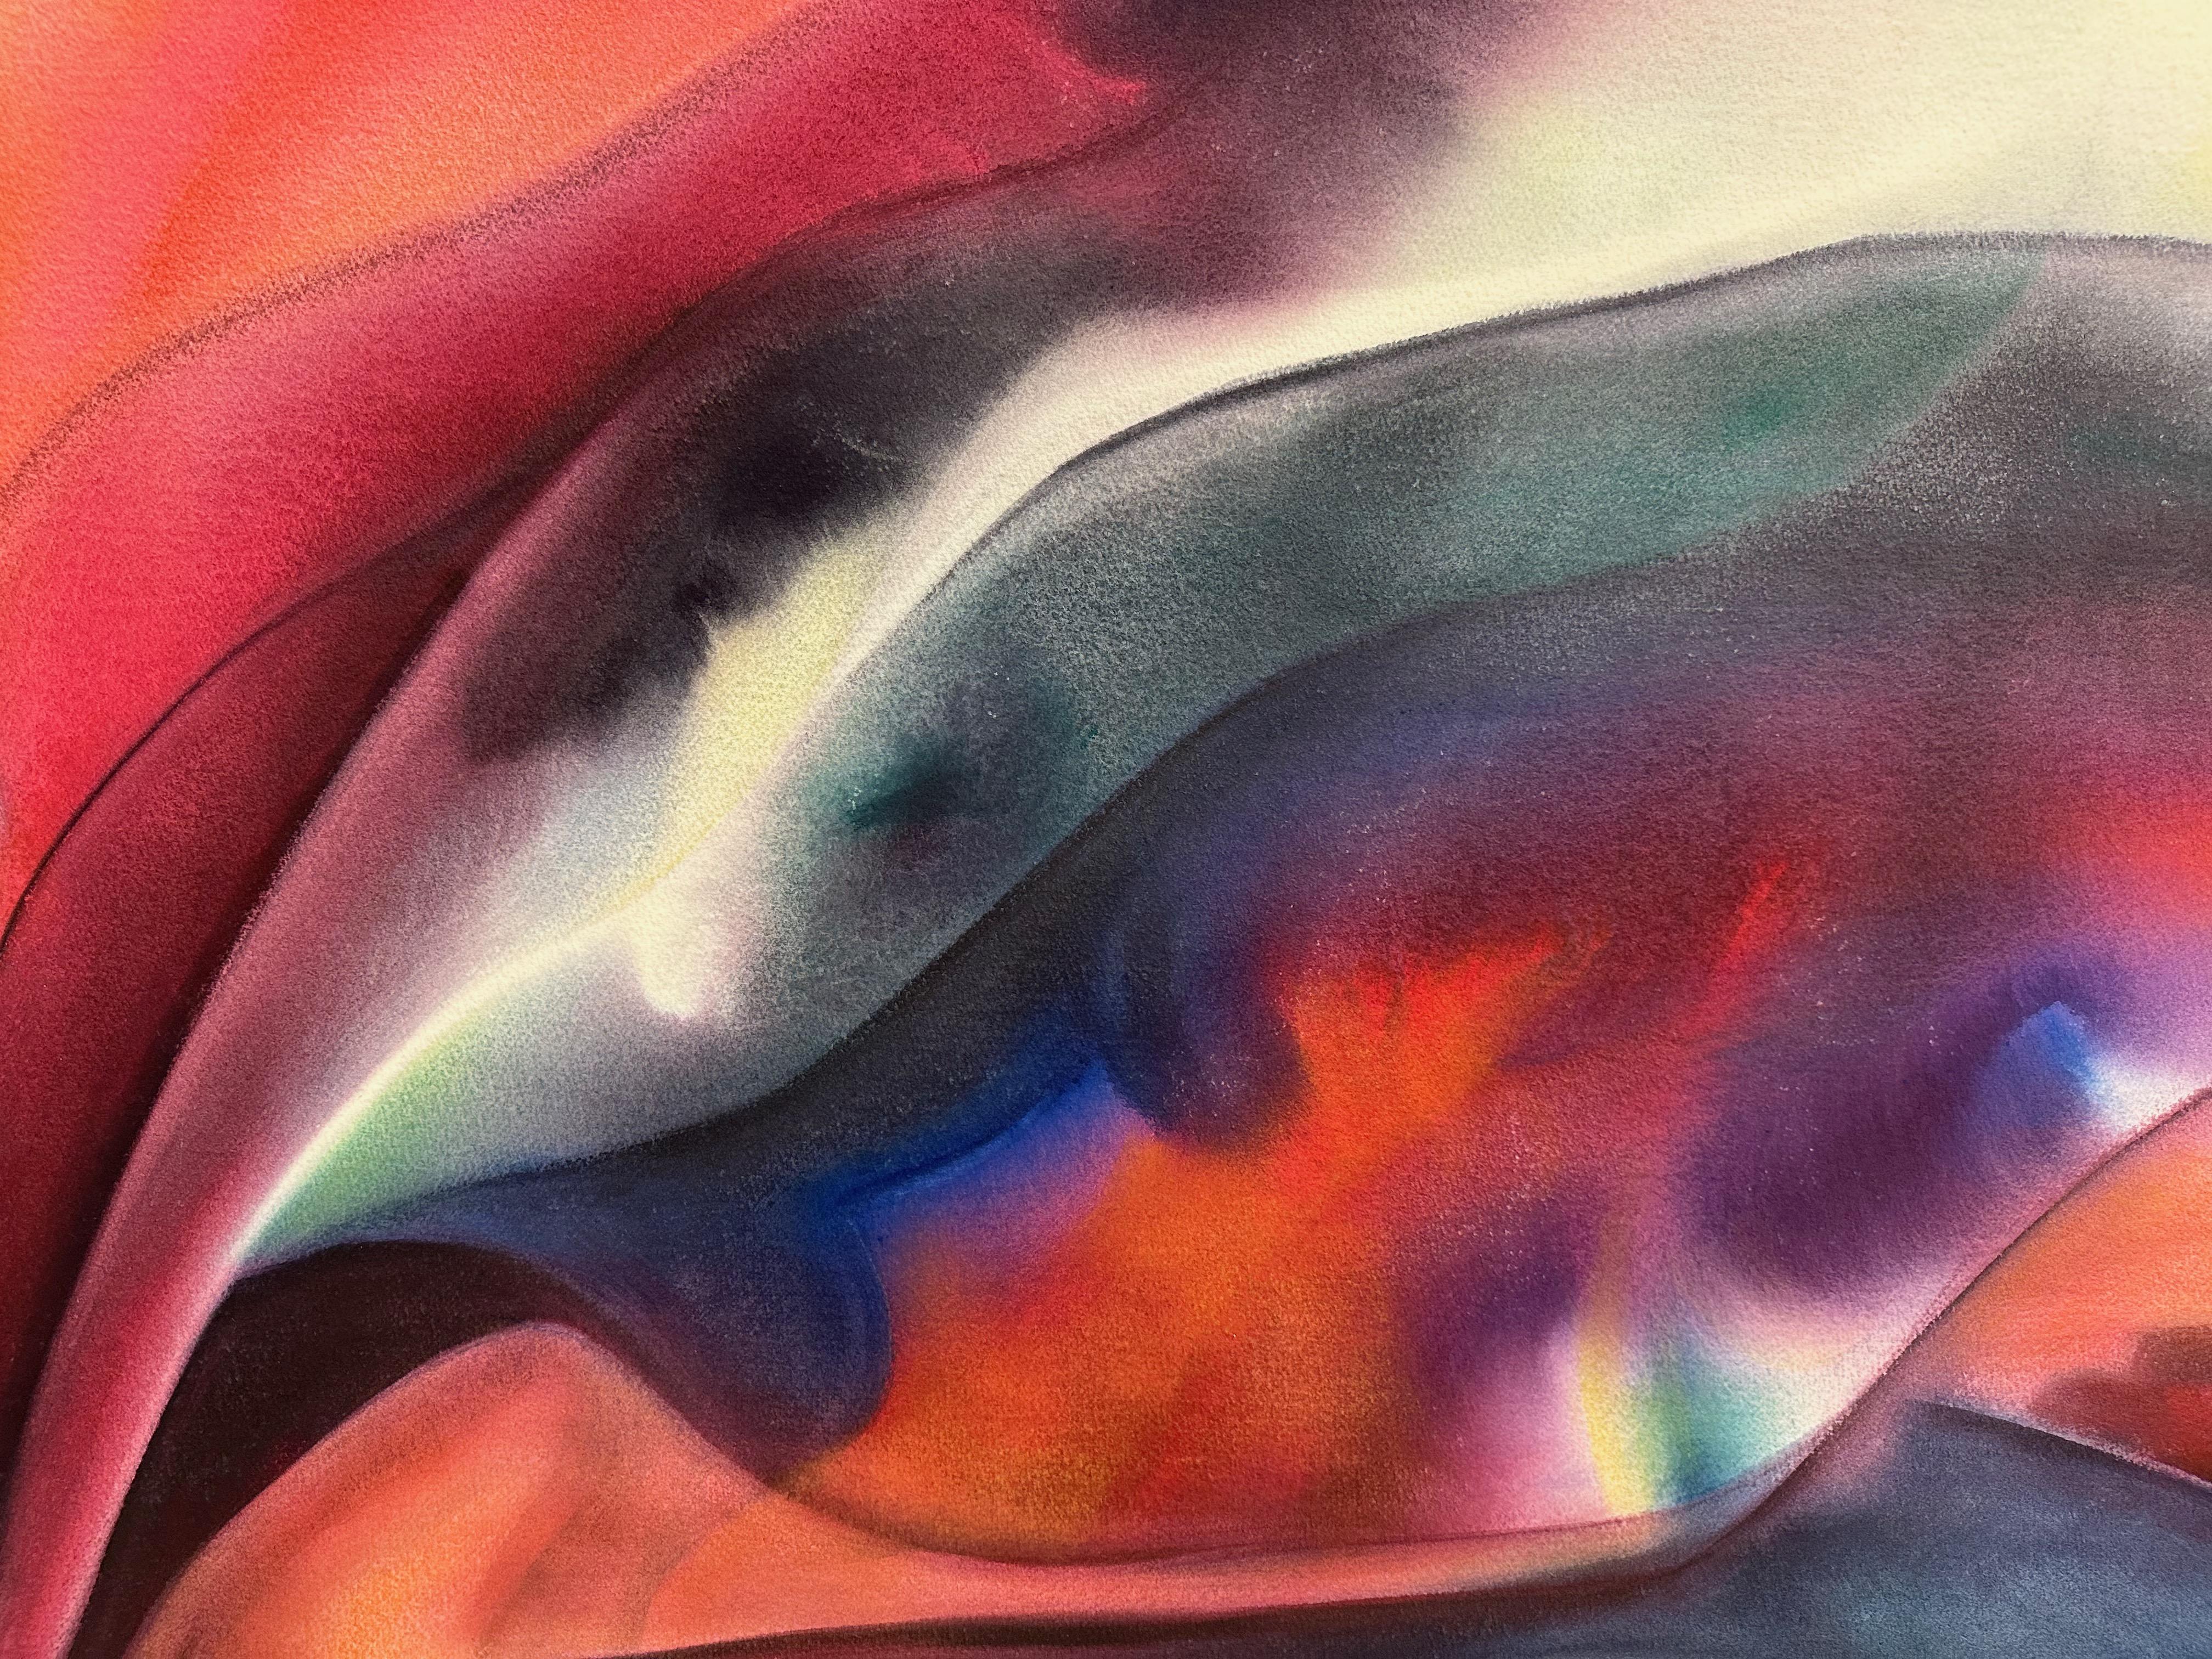 Hot Flame II Abstract Work On Paper - Painting by Frank Monaco